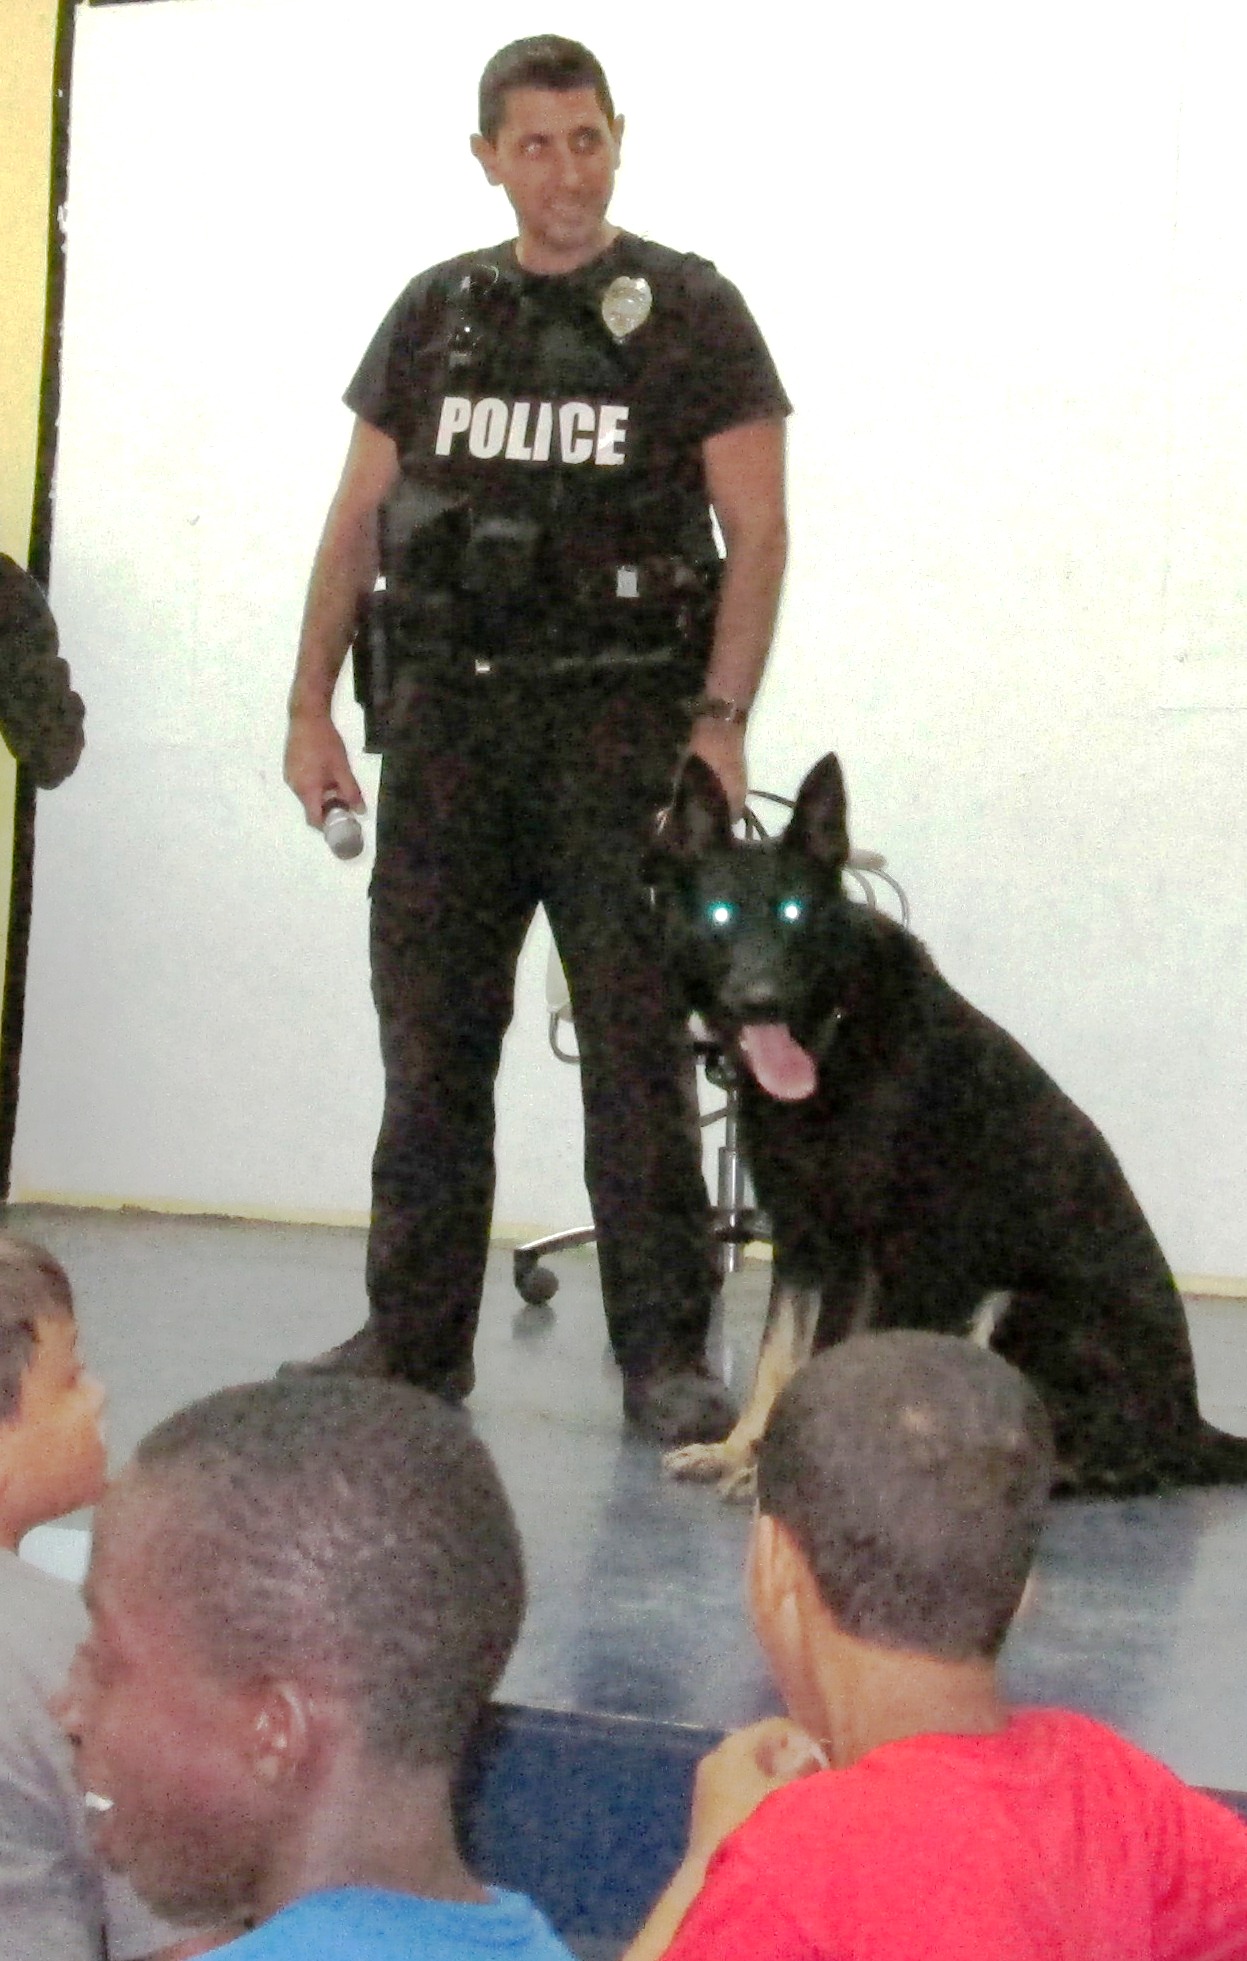 Police Officers Richard Dominguez and Ares.